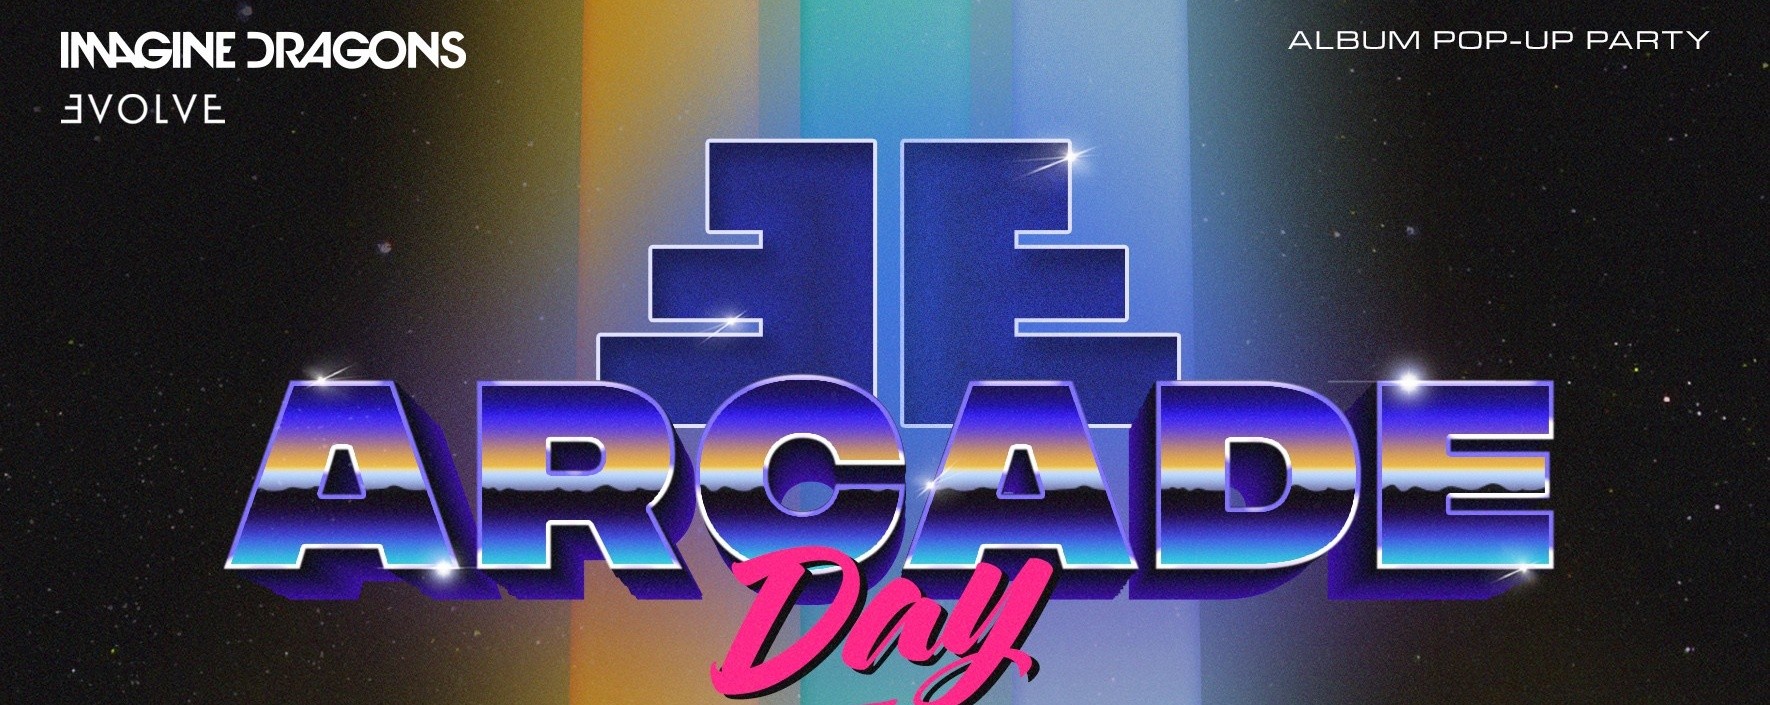 Imagine Dragons Pop-up Party: ƎE Arcade Day